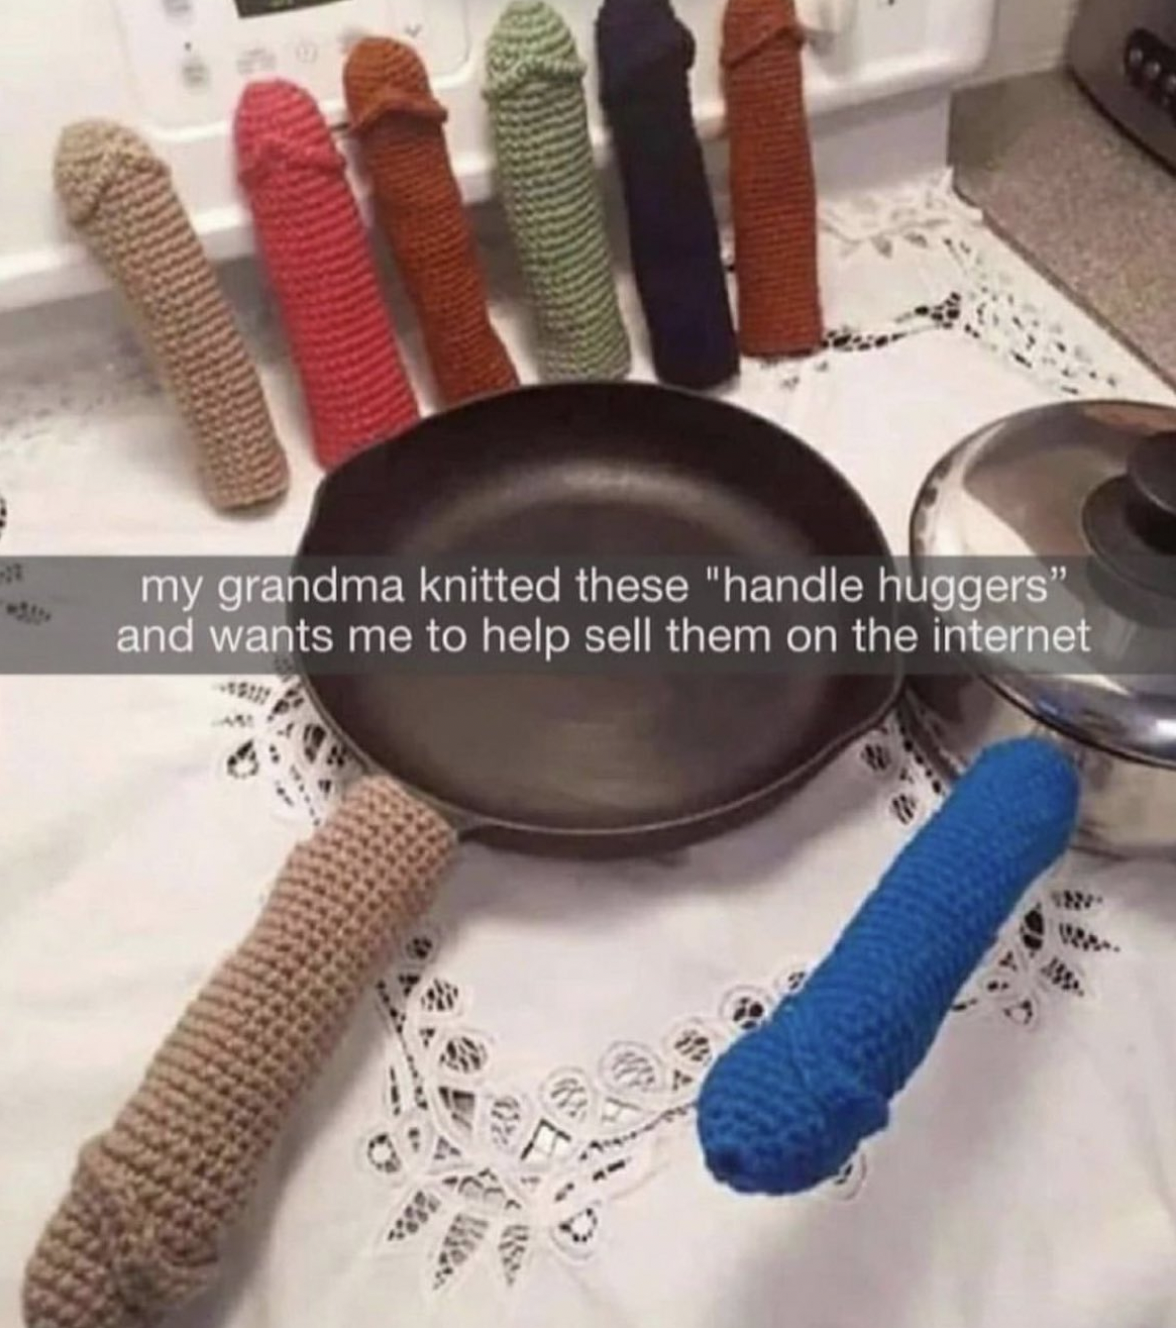 tableware - i S my grandma knitted these "handle huggers" and wants me to help sell them on the internet M